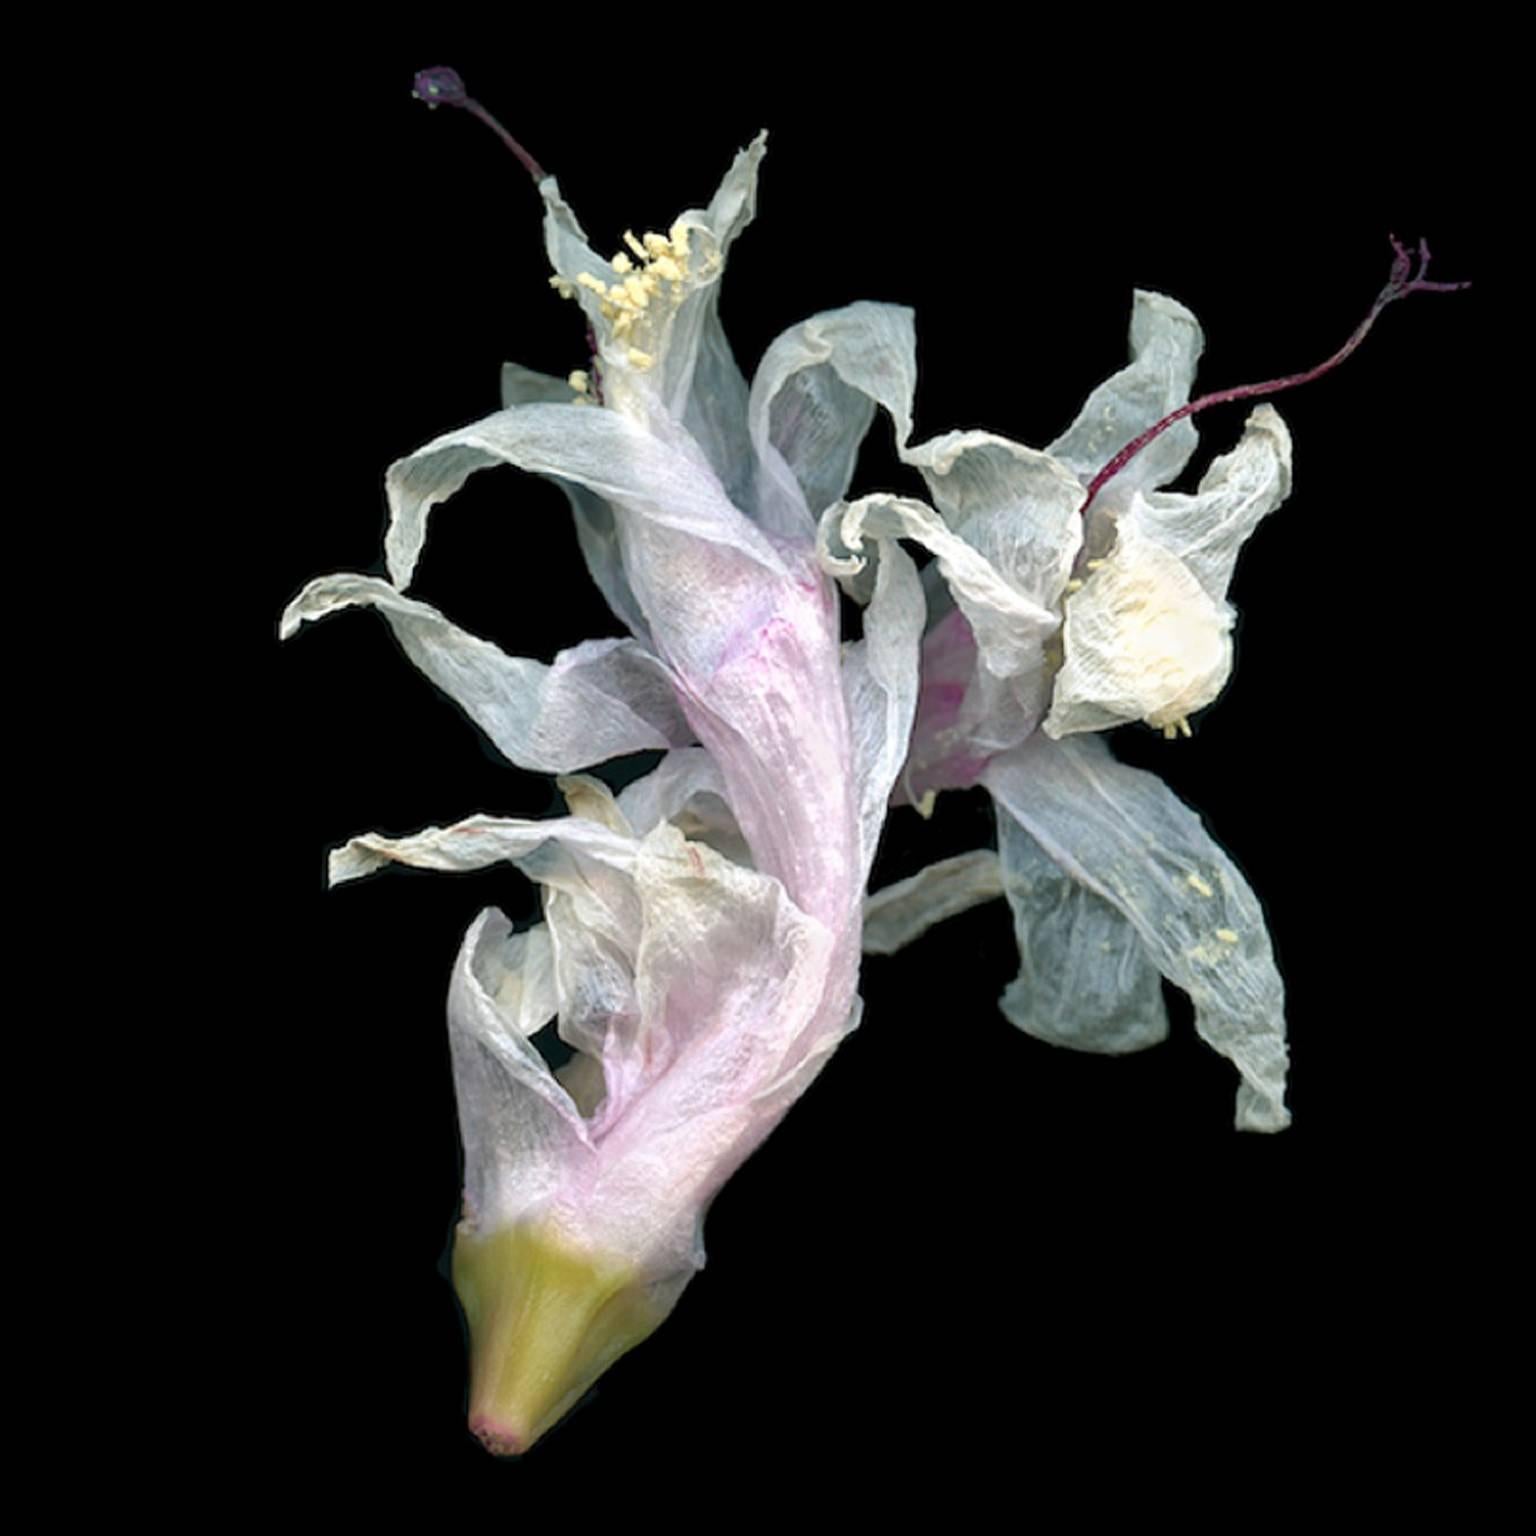 Jerry Freedner Color Photograph - Christmas Cactus 1 (Floral Still Life Photograph of Pastel Pink Flower on Black)